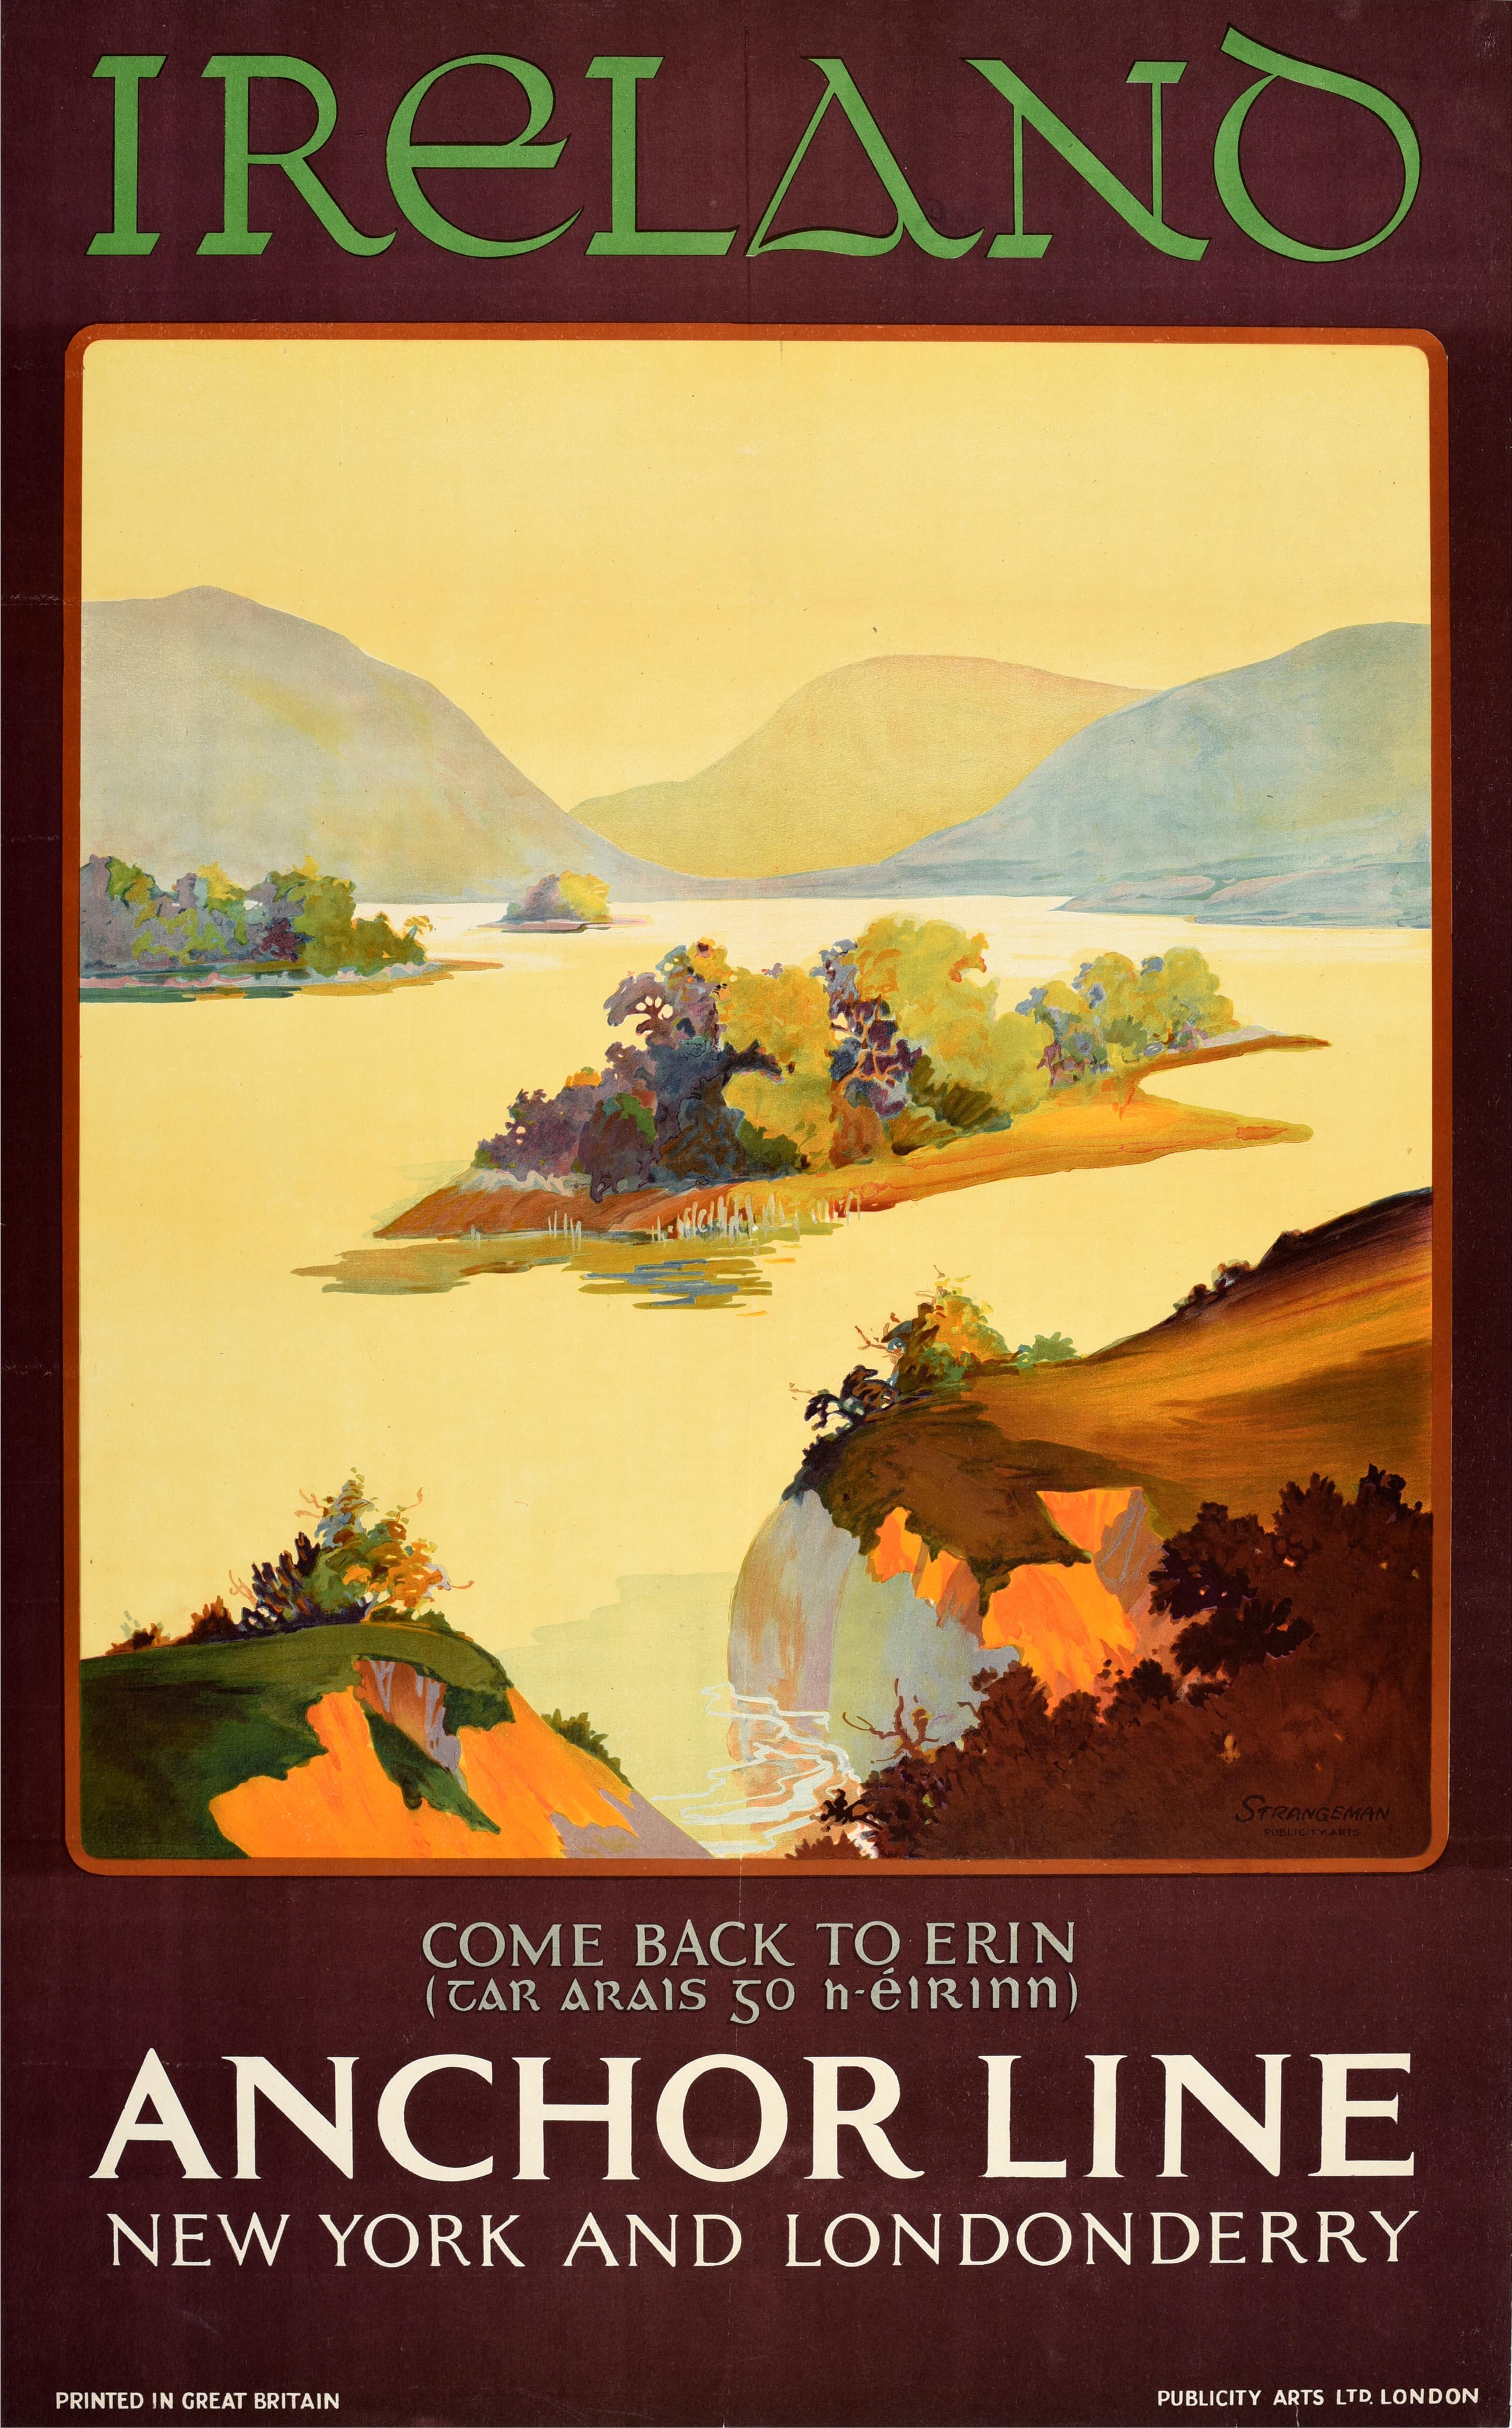 Unknown Print - Original Vintage Travel Poster Ireland Come Back To Erin Anchor Line Cruise Ship